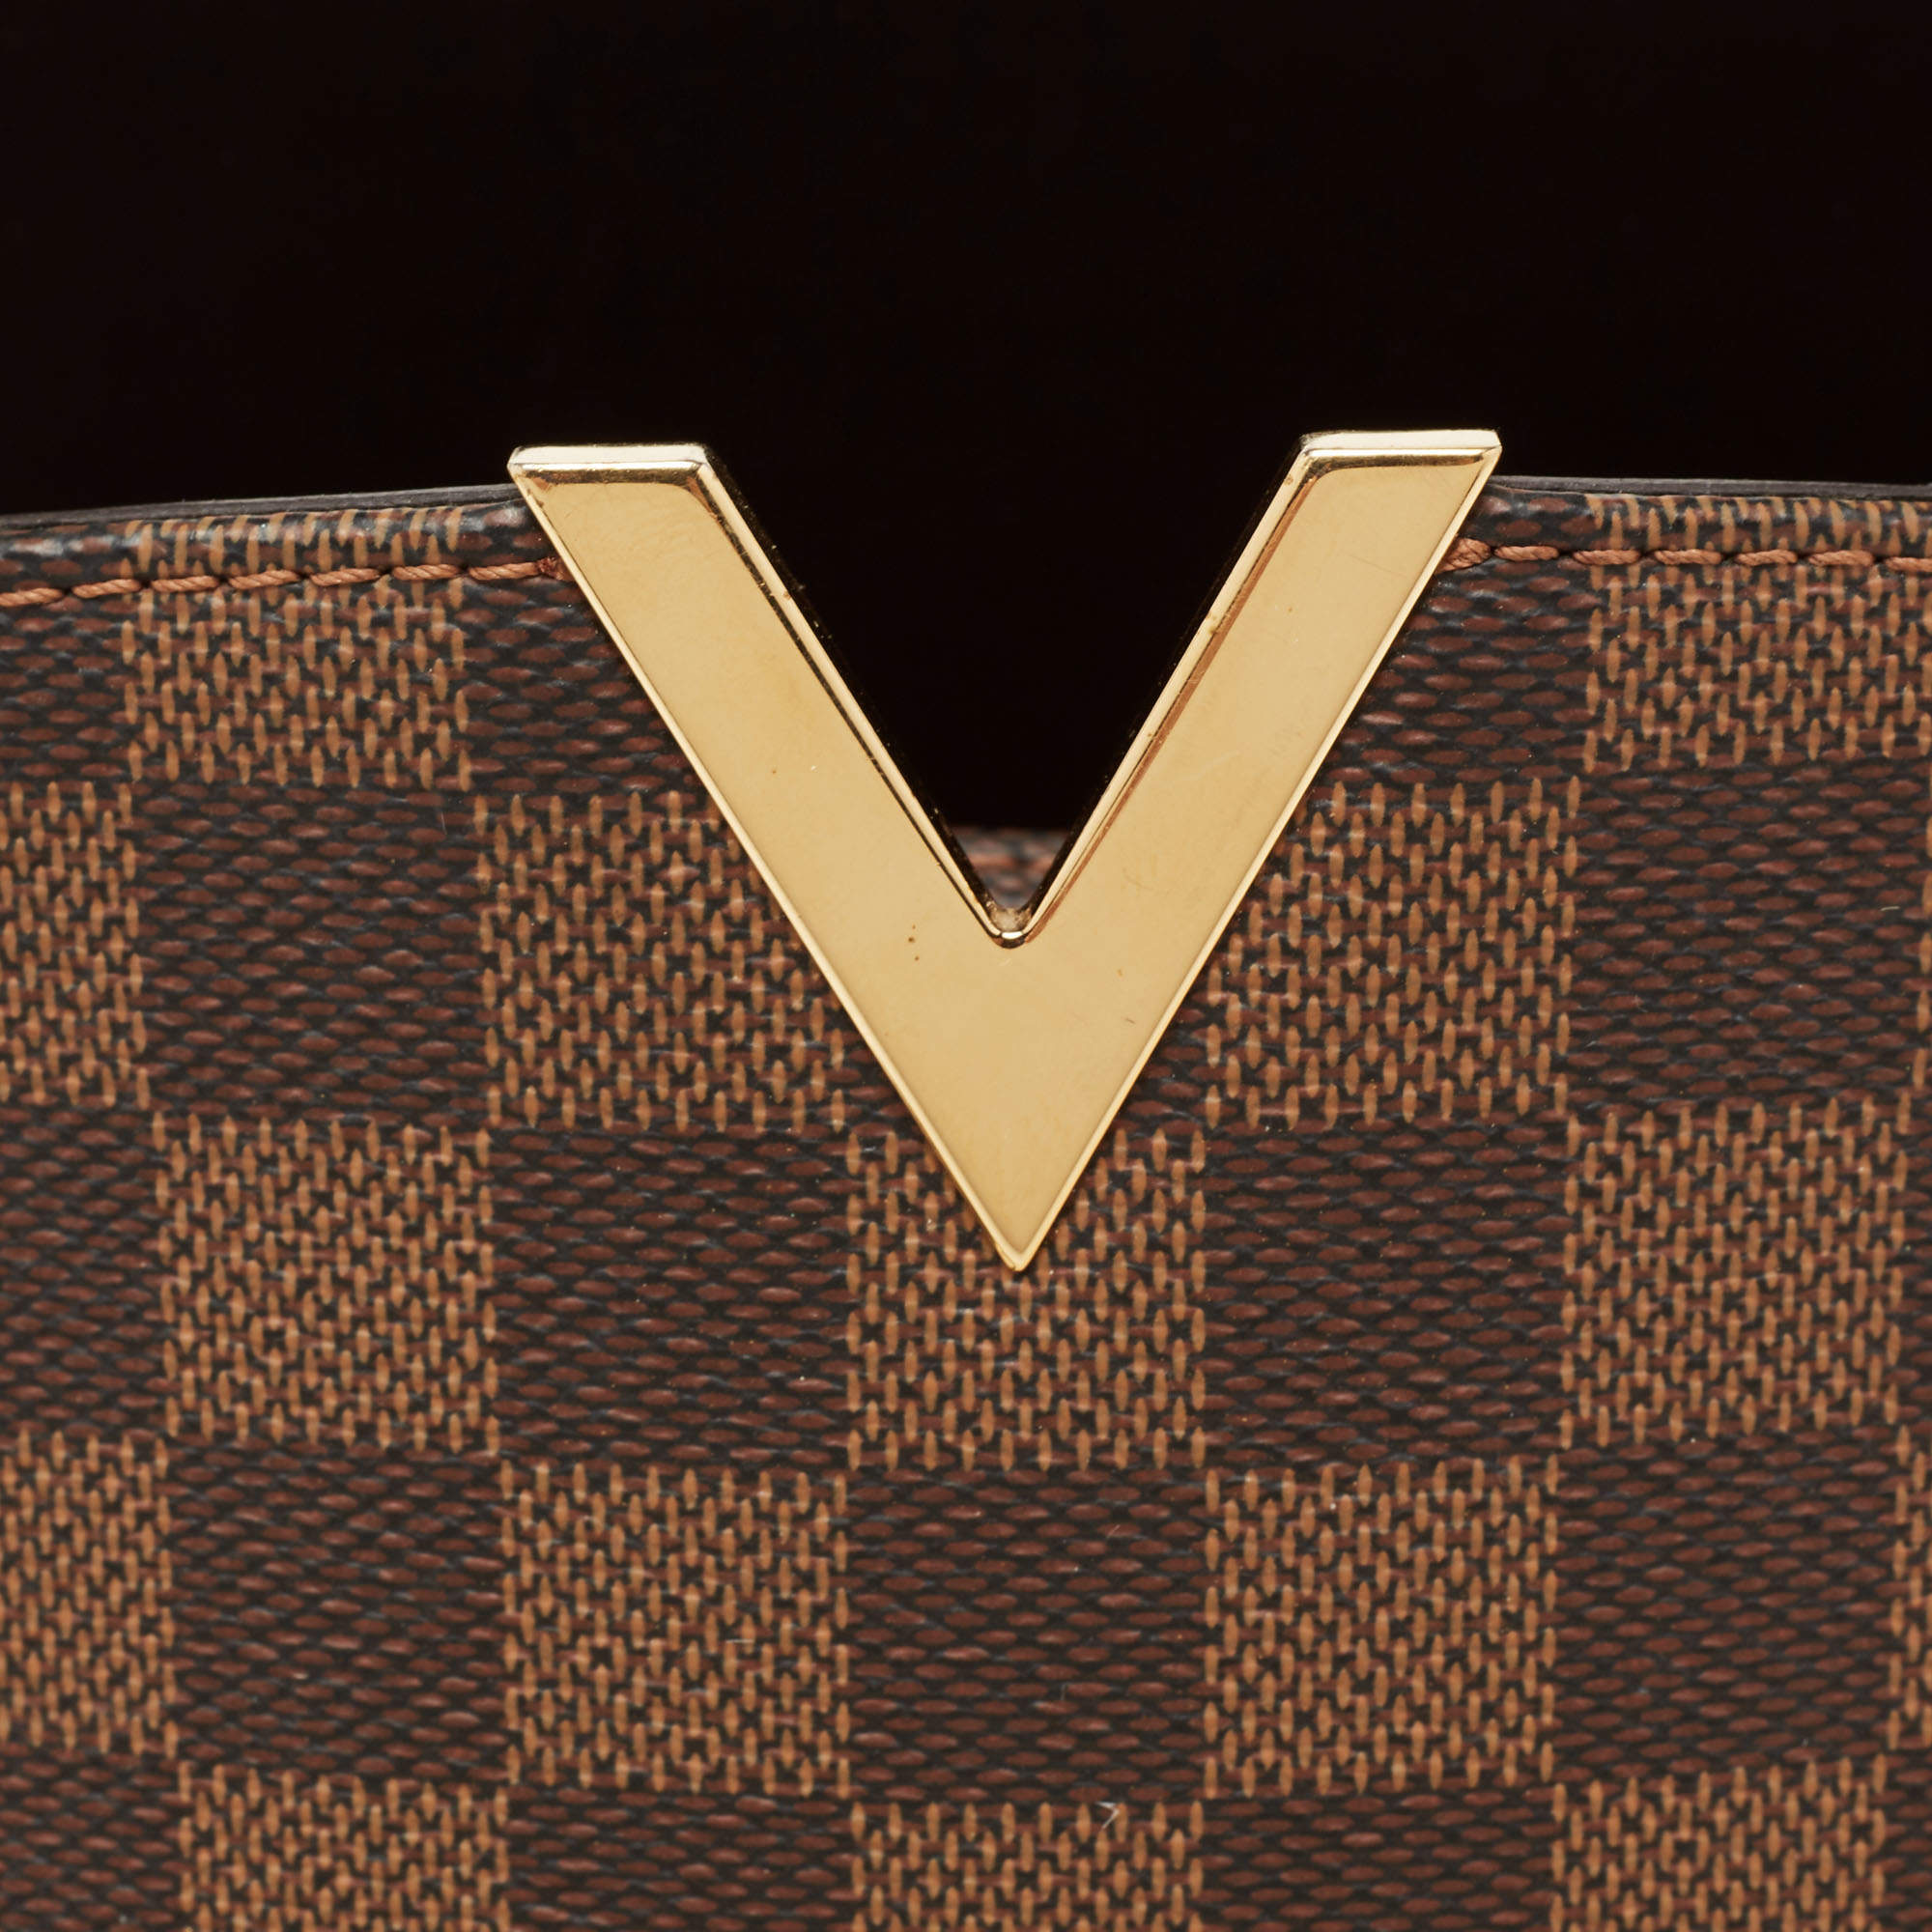 N-Cash - Louis Vuitton Kensington Bowling bag in Damier Ebene is currently  available at N-Cash Bags Watches Gadgets Pawnshop. Item is backed by an  authenticity guarantee to give buyer's confidence in shopping